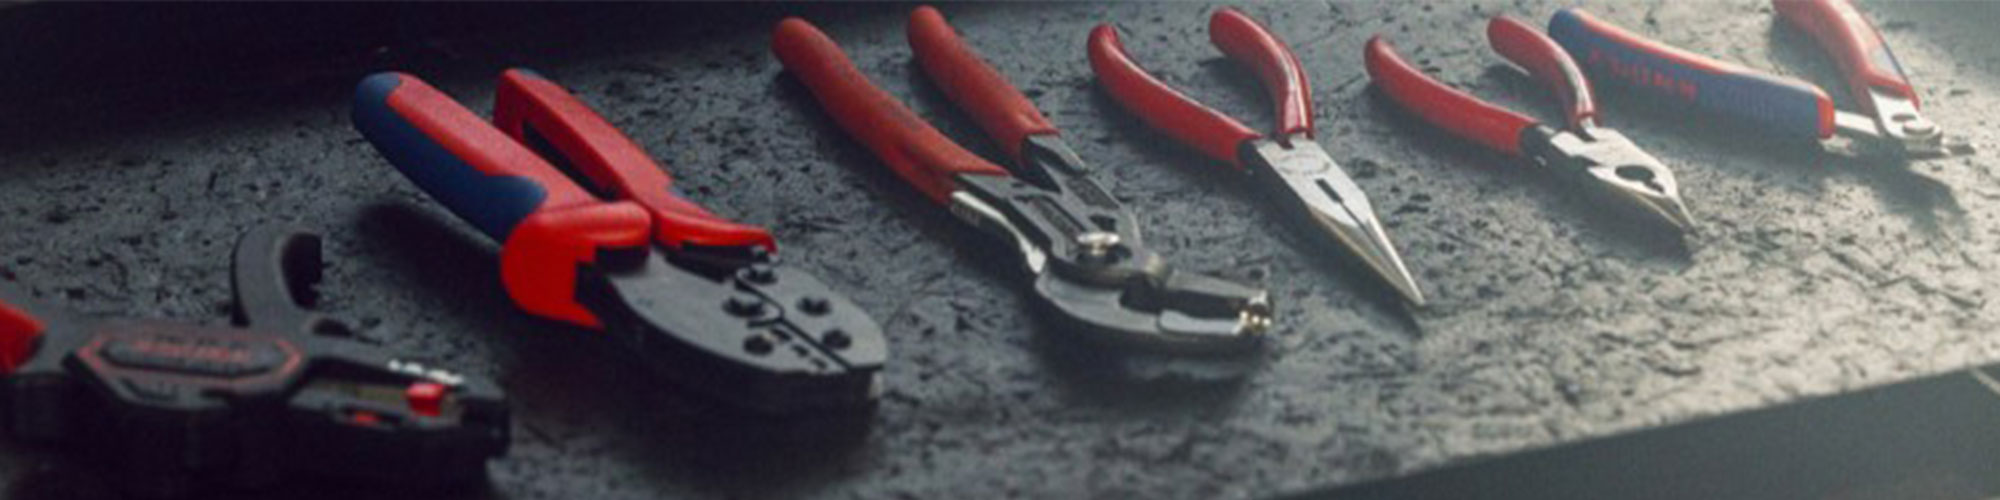 KNIPEX Tools Dsitributor | Electric Supply & Equipment